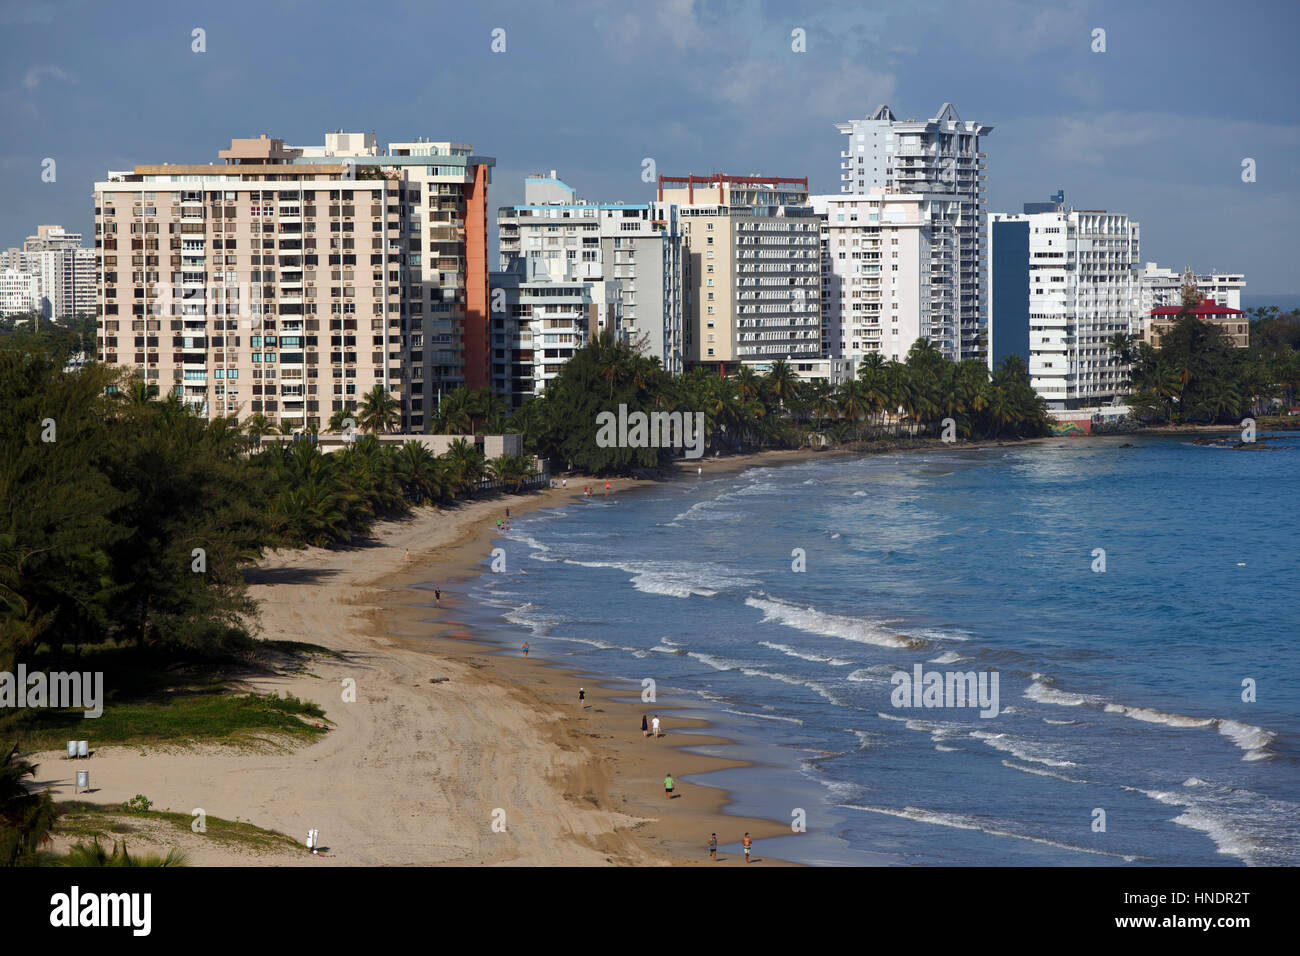 High rise buildings on the waterfront. Elevated view of Isla Verde beach,  Carolina, San Juan, Puerto Rico Stock Photo